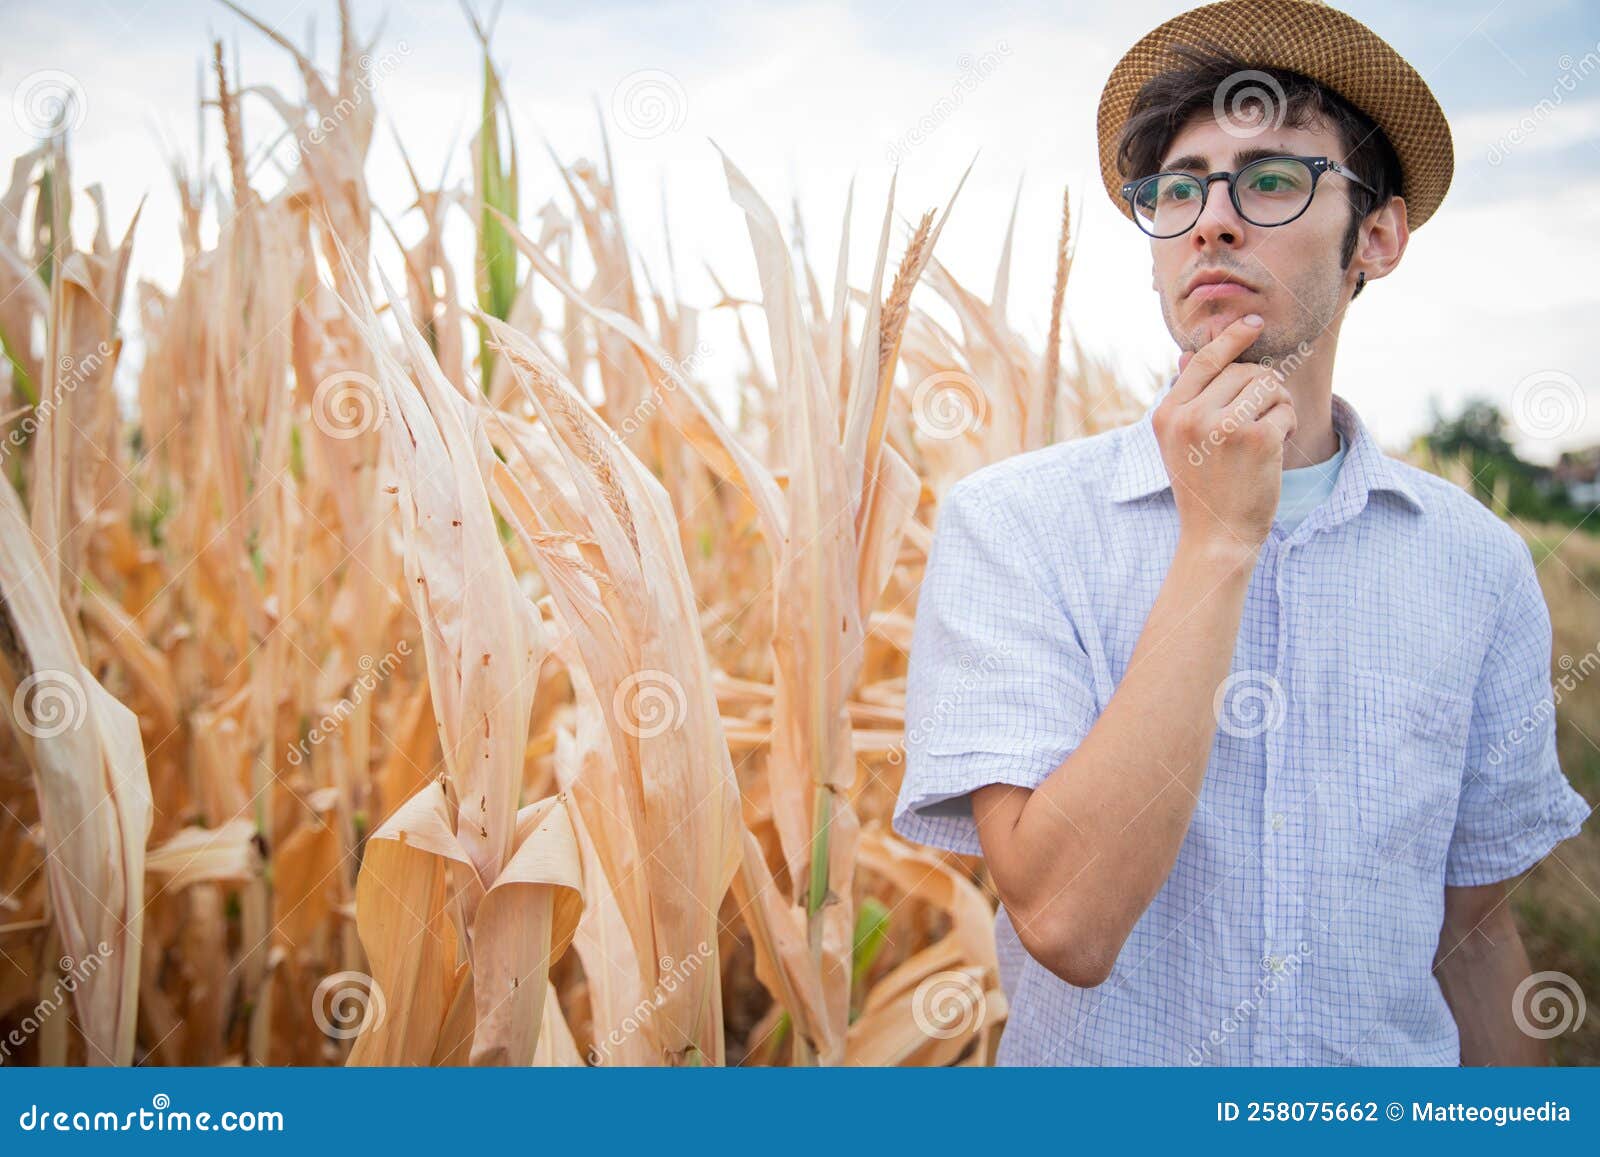 farmer pensive at the disastrous effects of drought on corn field all burned